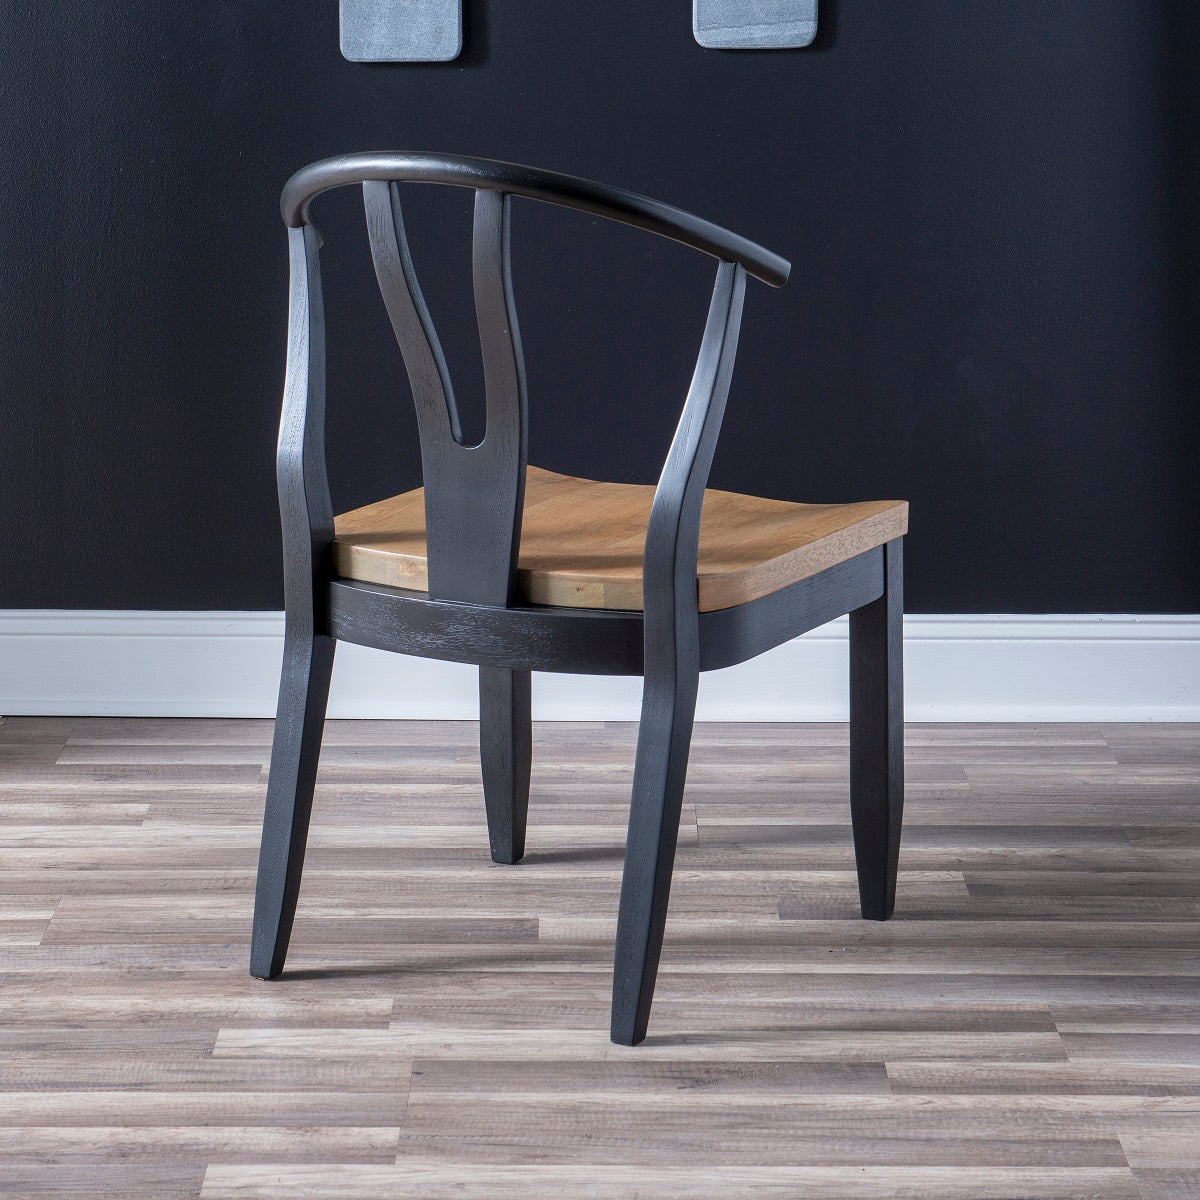 Franklin Wishbone Side Chair in Dining height. Harvest Oak seats on quartered white oak veneer sit atop aged black painted bases with interesting curves throughout the design. Available in Counter Height.